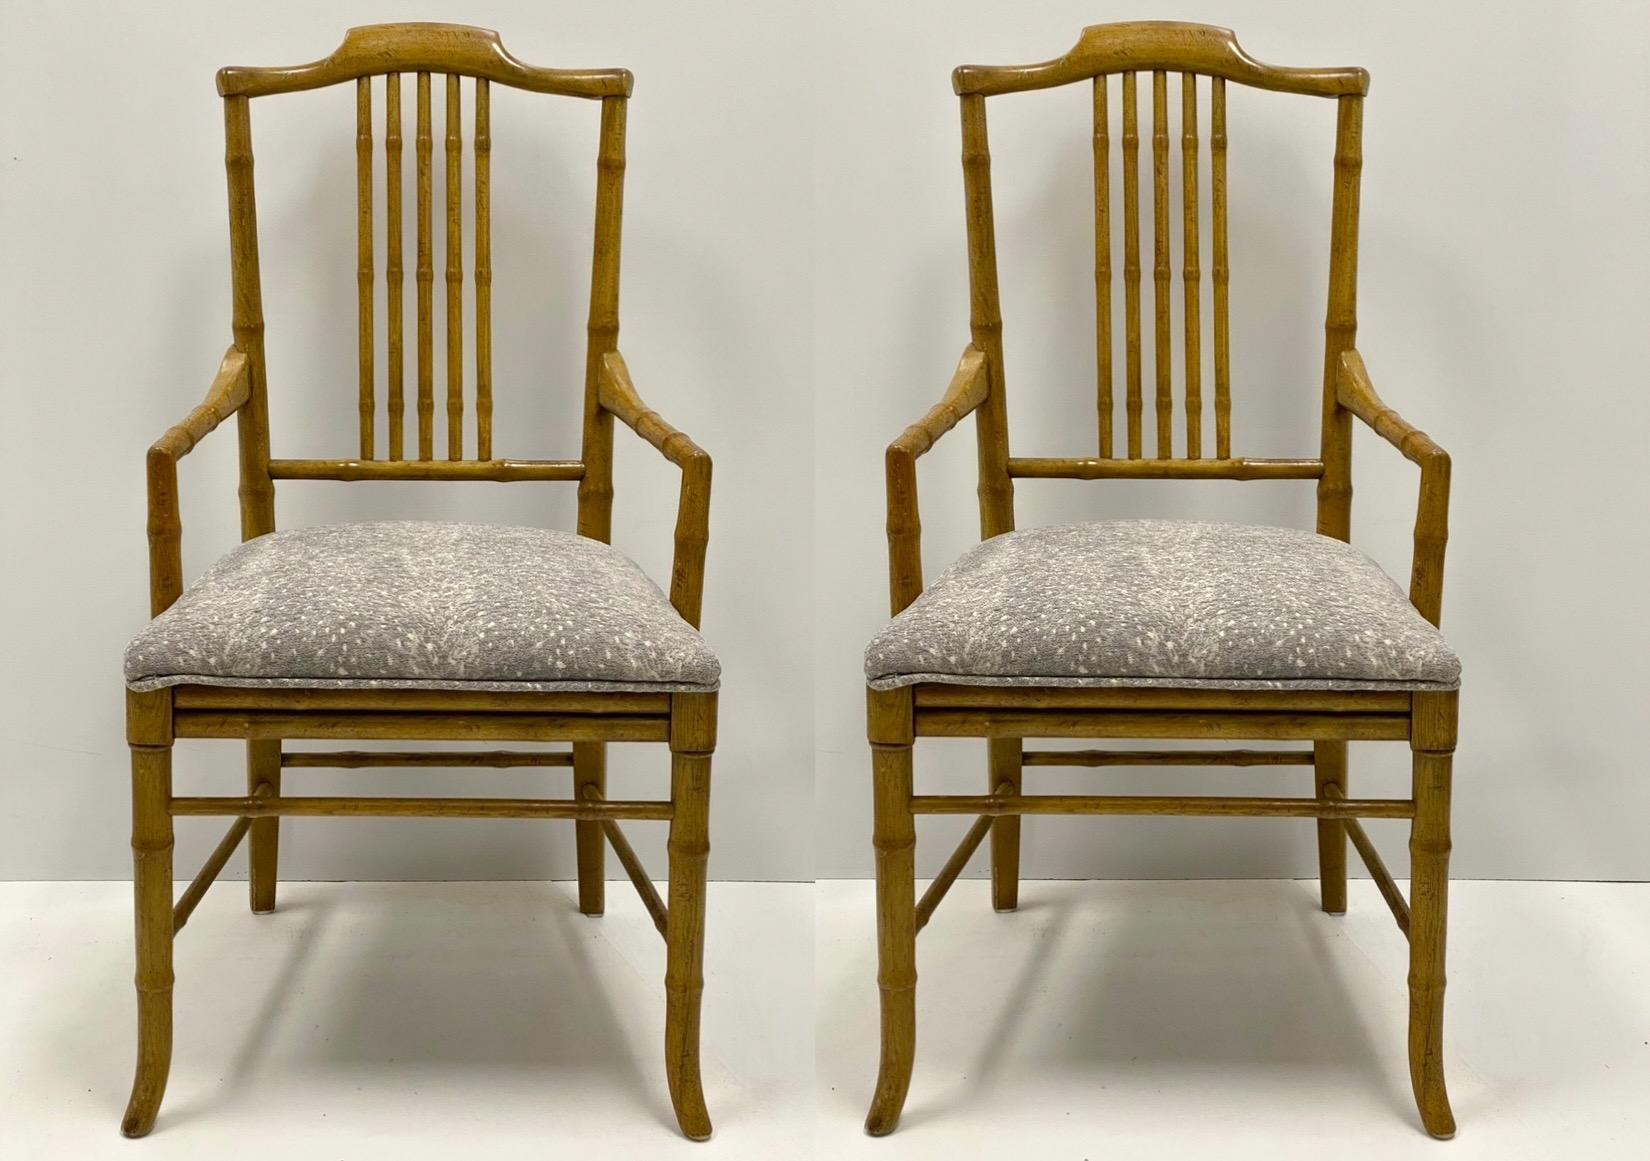 This is a pair of regency style faux bamboo armchairs upholstered in a spotted gray fawn fabric. The frame appears to be maple. They most likely date to the 70s, and they are unmarked. The pair are in very good condition. 

My shipping is for the